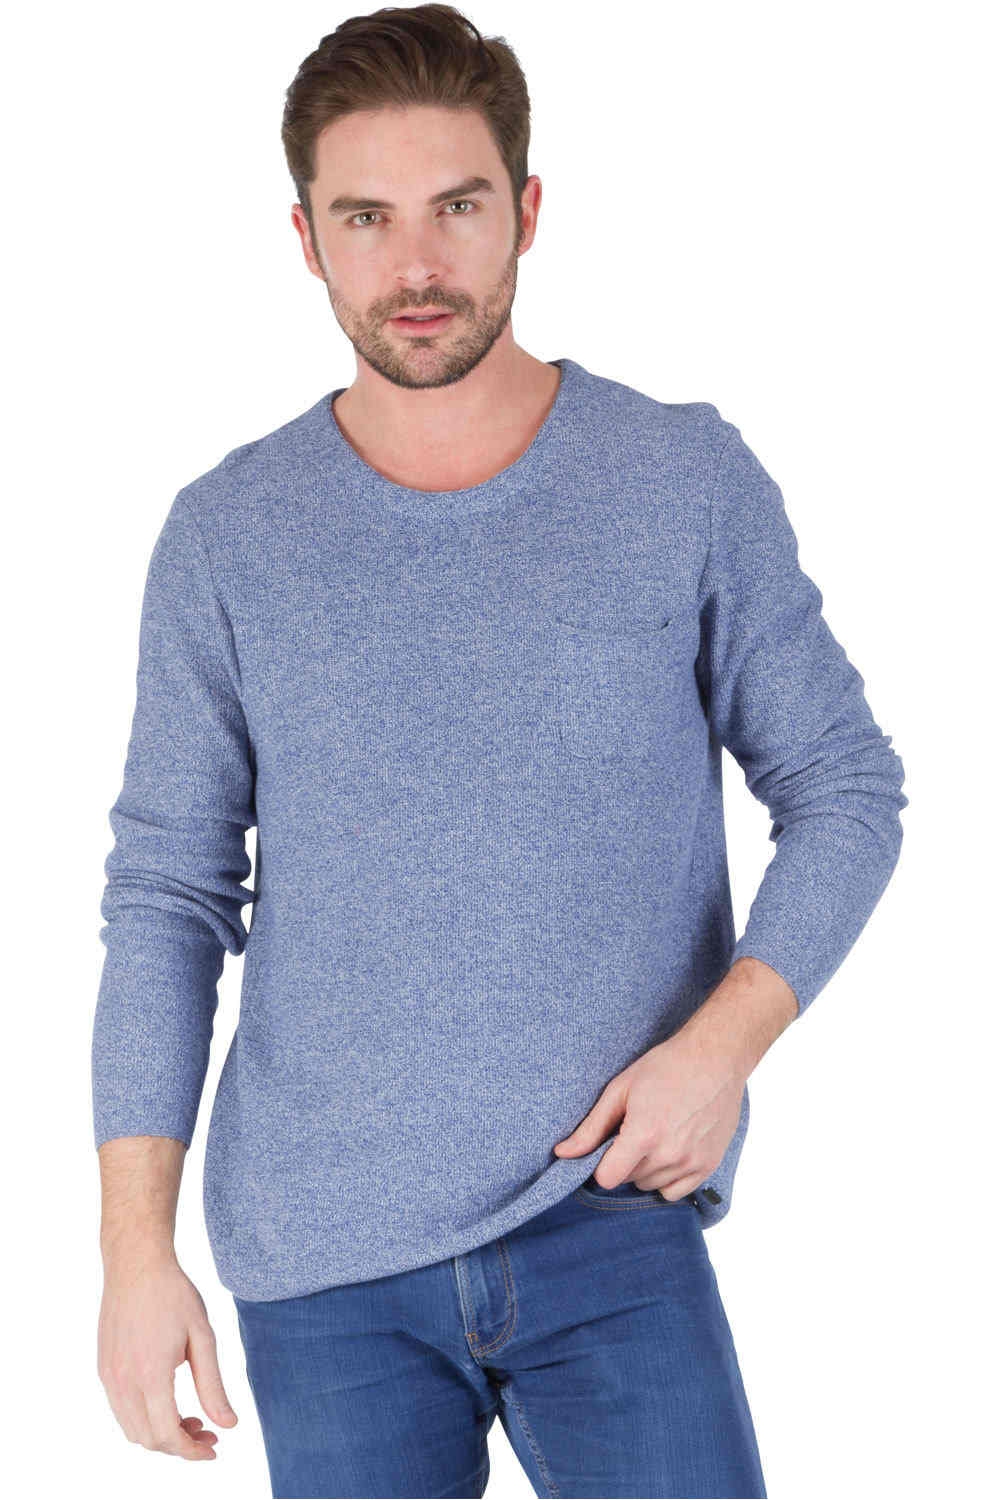 Bench jersey hombre LOOSE KNITTED C NECK vista frontal